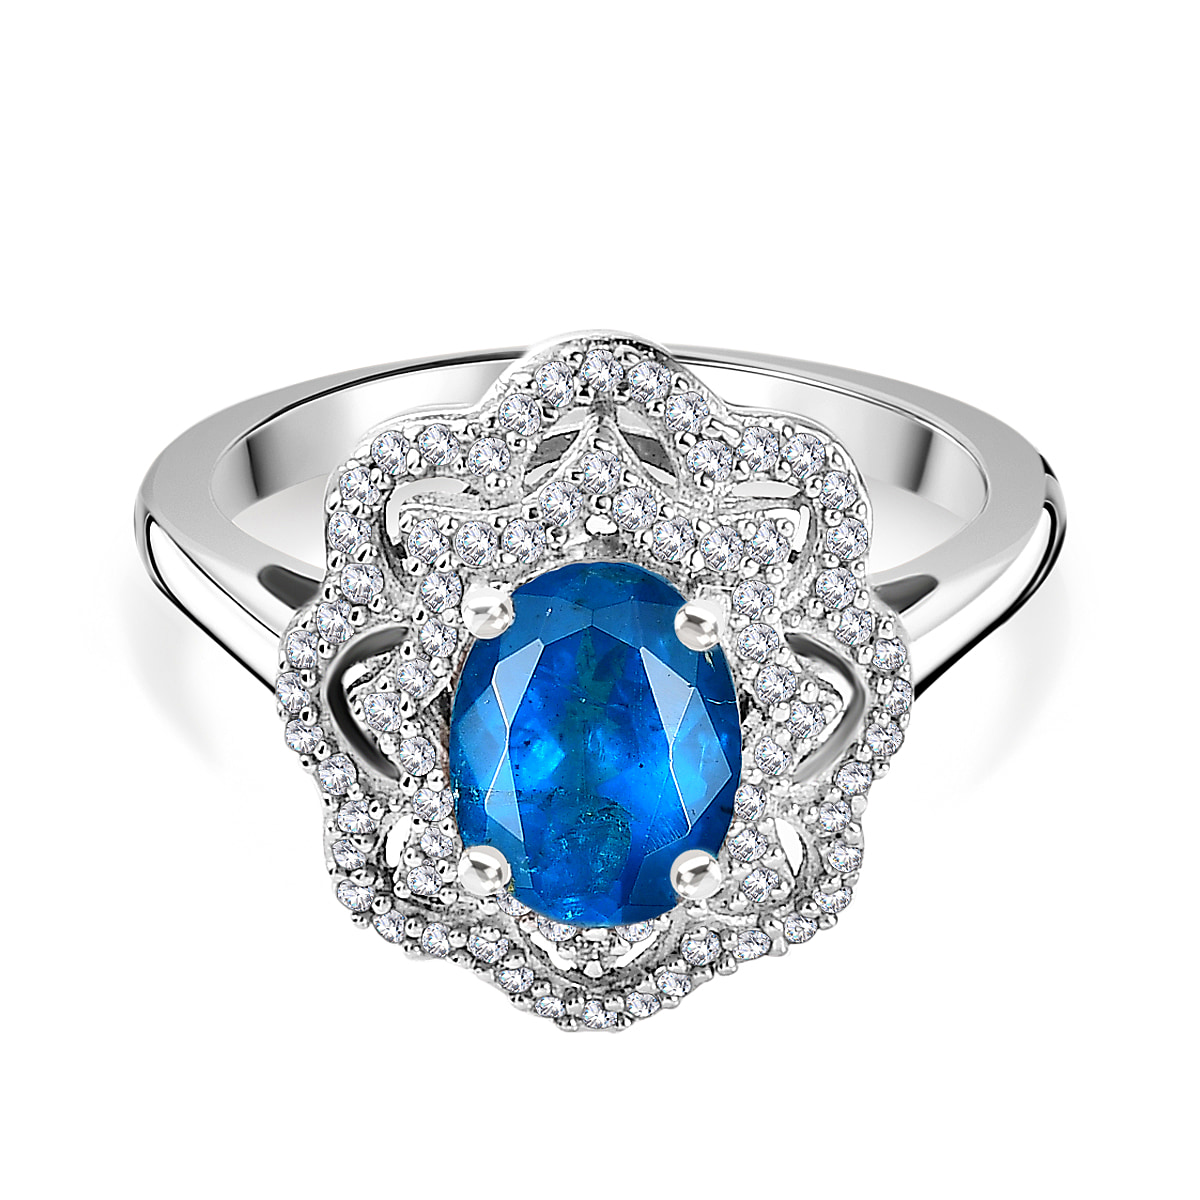 THE NEON QUEEN - Premium Neon Apatite and Natural Zircon Halo Ring in Platinum Overlay Sterling Silver 1.67 Ct